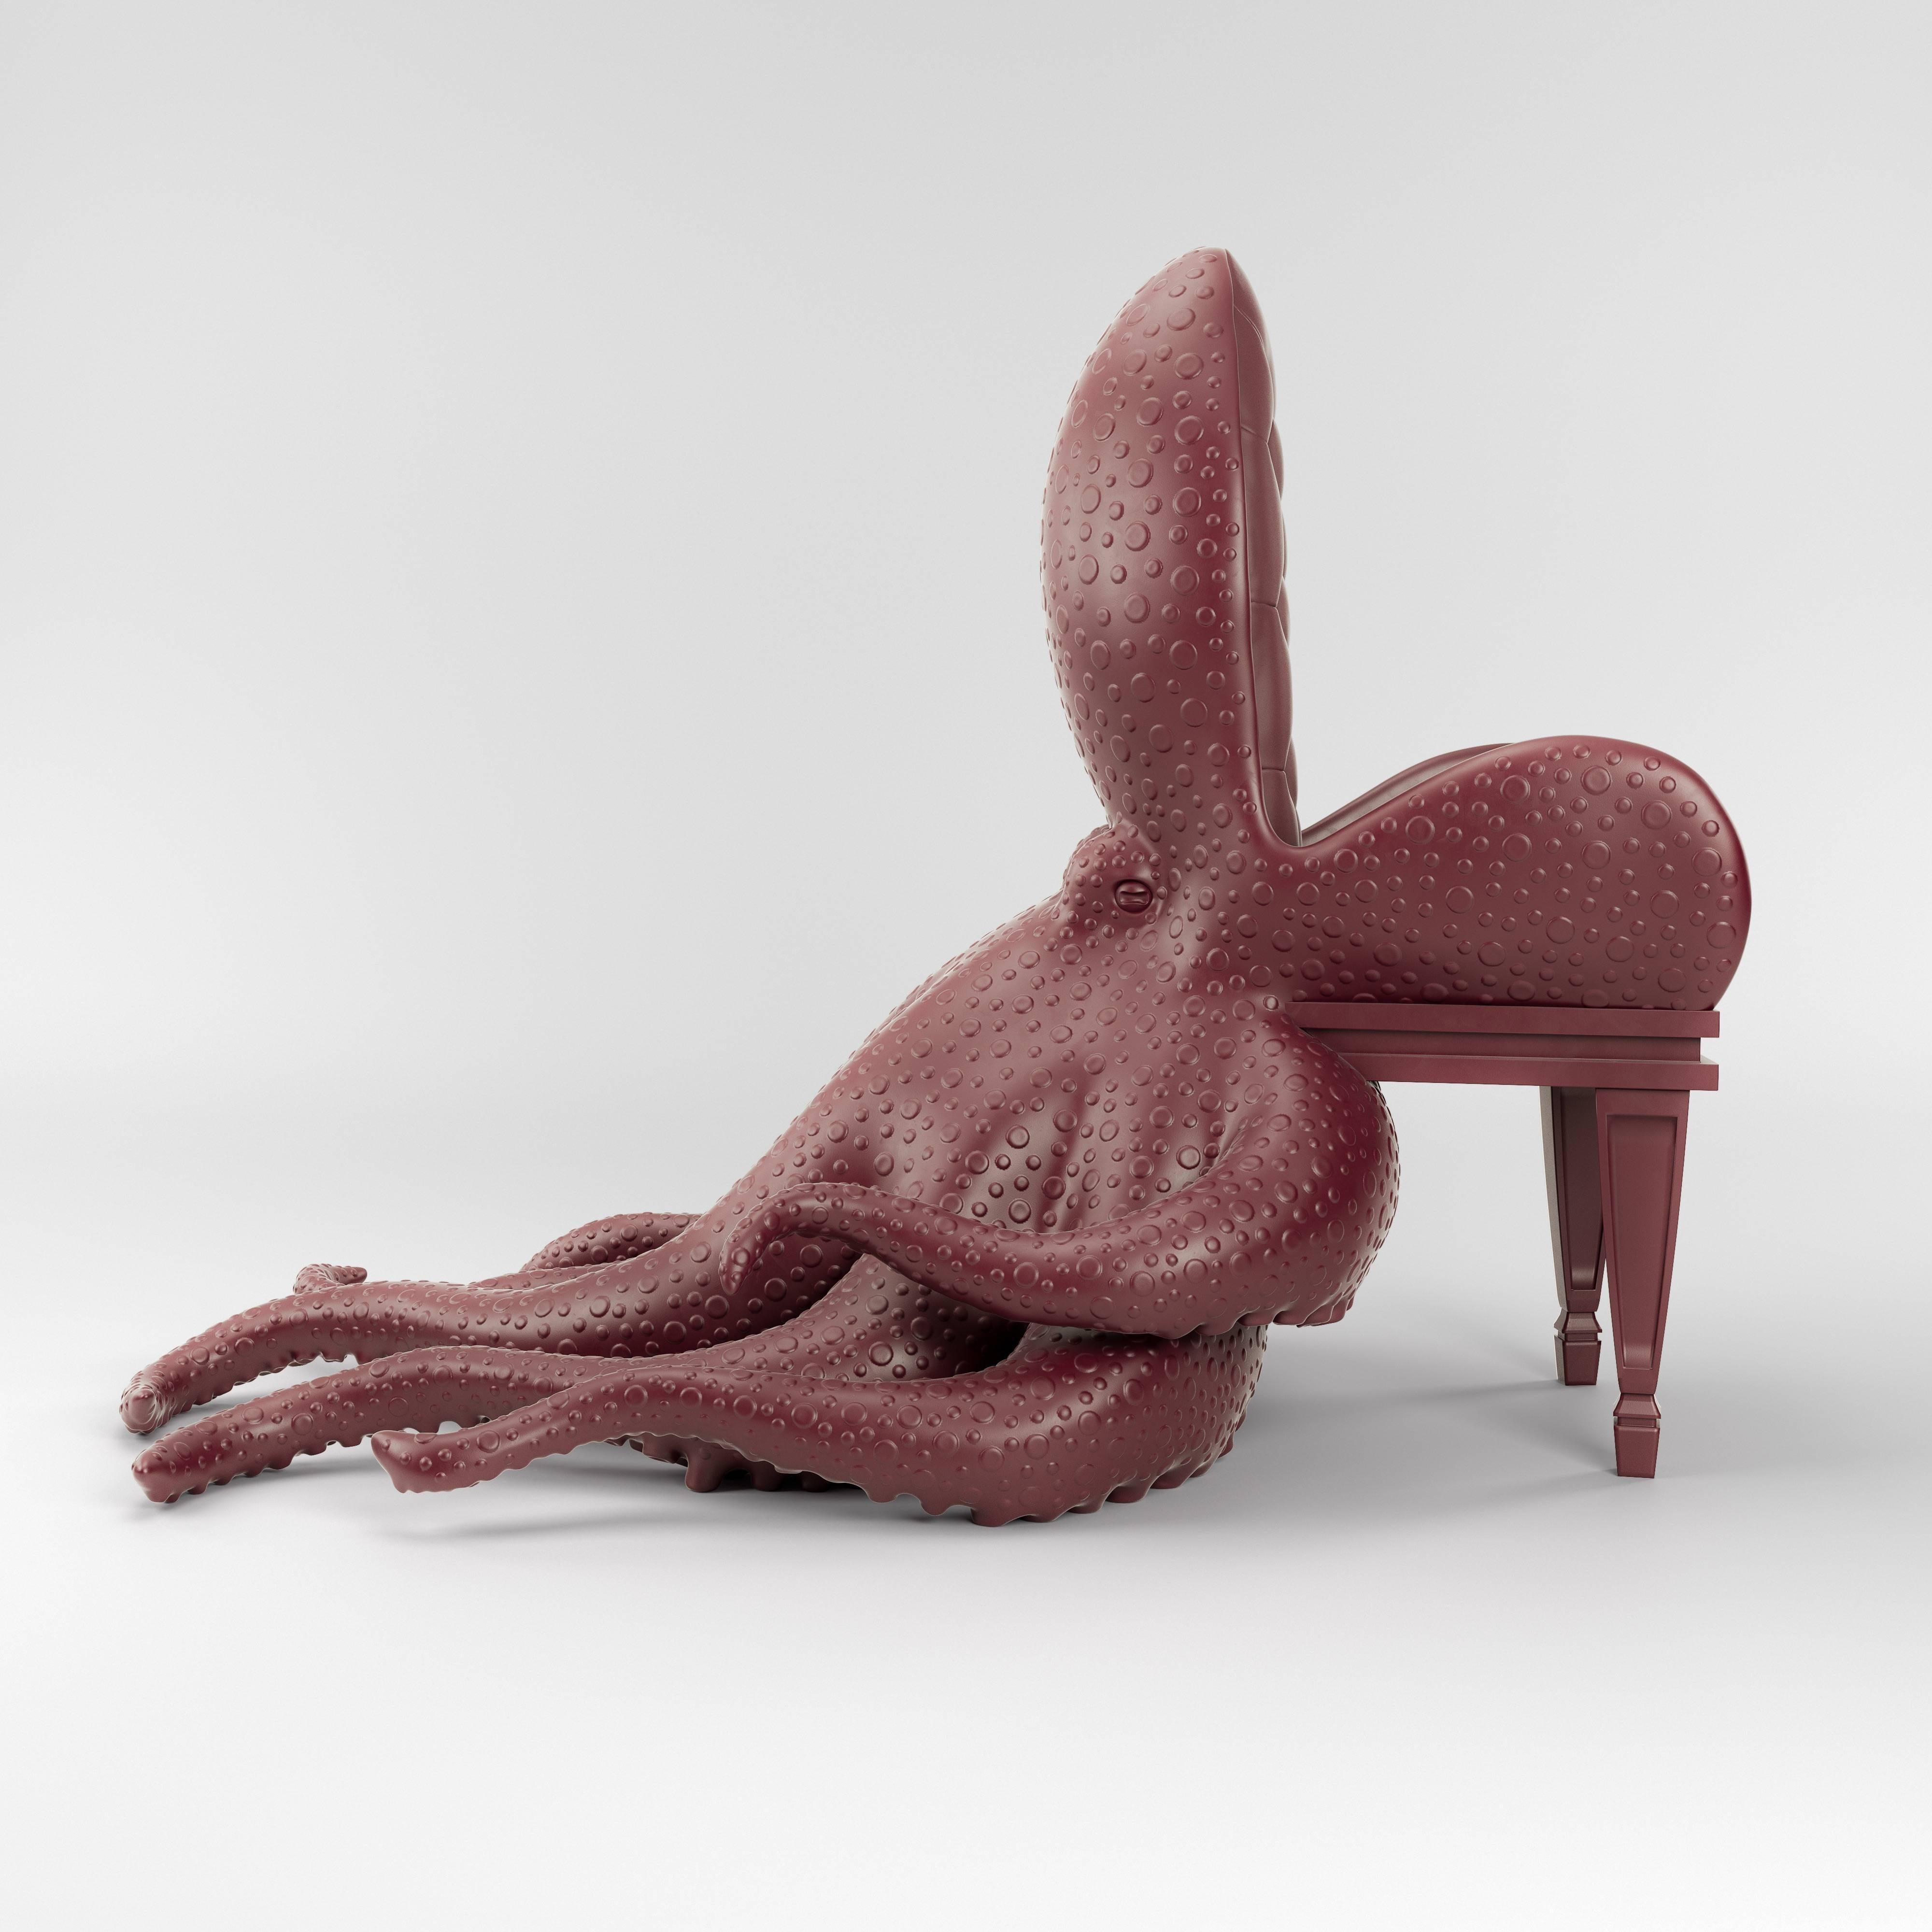 This piece belongs to the Animal Chair collection series designed by Maximo Riera Studio. A limited edition project that produces each chair in a non repeatable color code (Pantone) resulting in an individual and completely unique piece of art